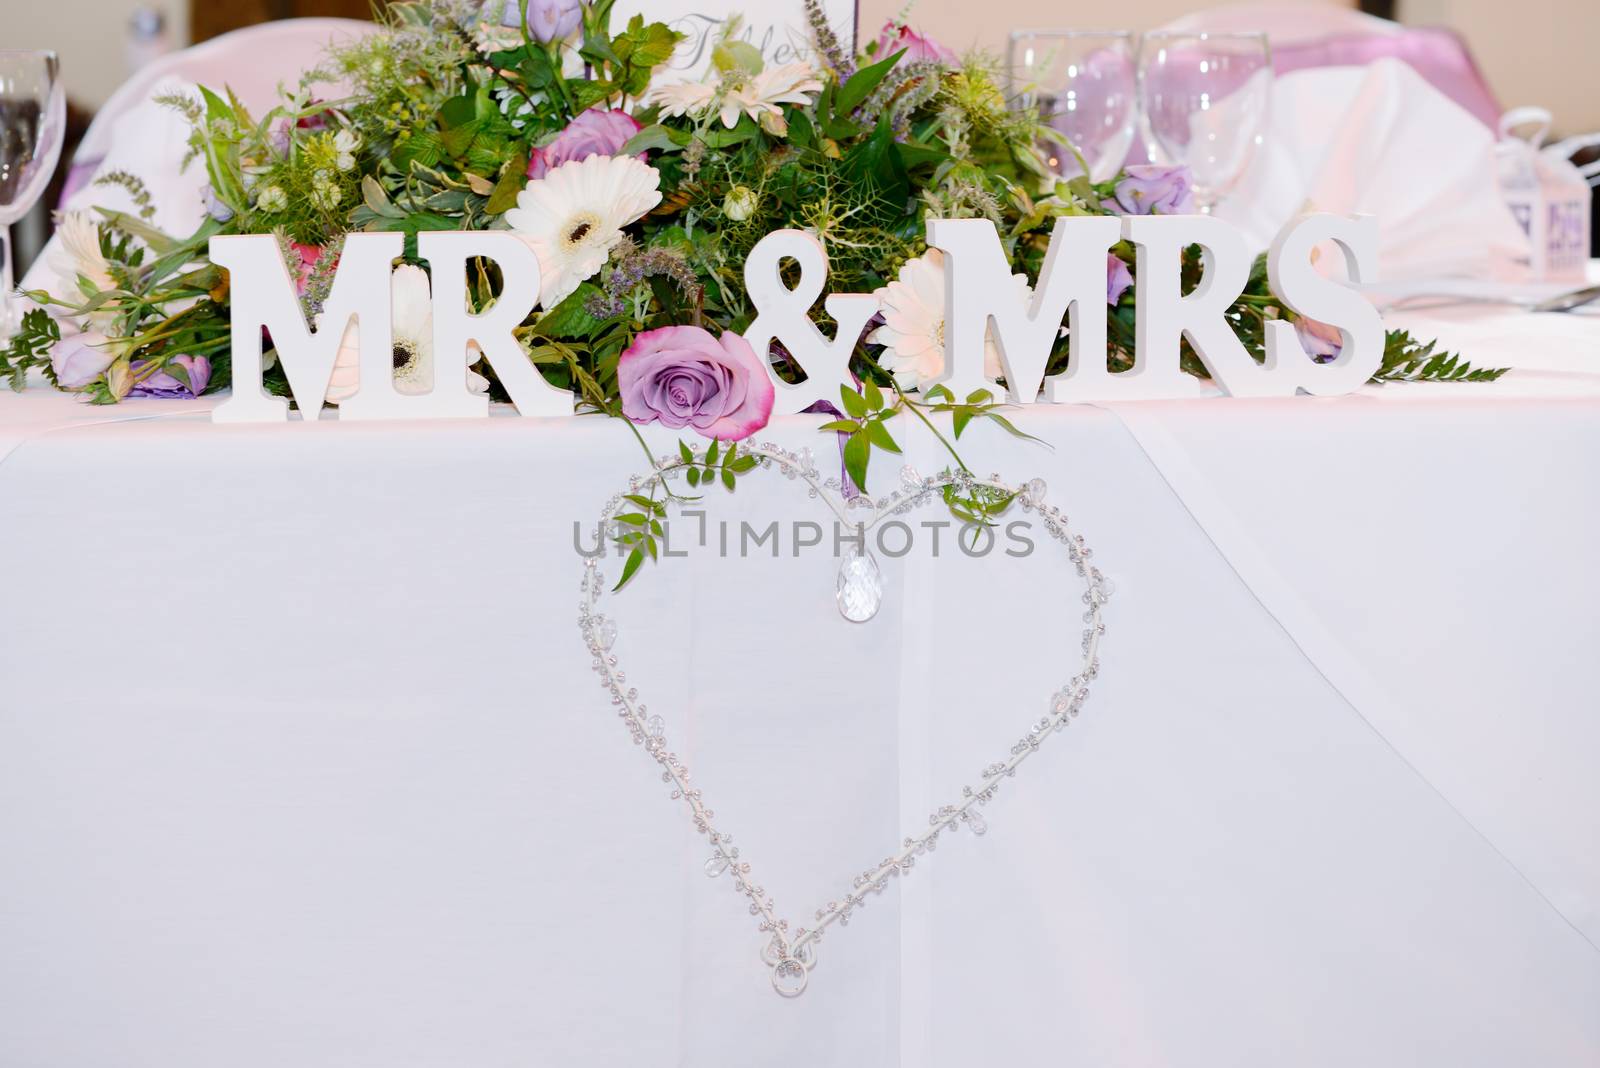 Decoration at wedding reception is heart shape with mr & mrs